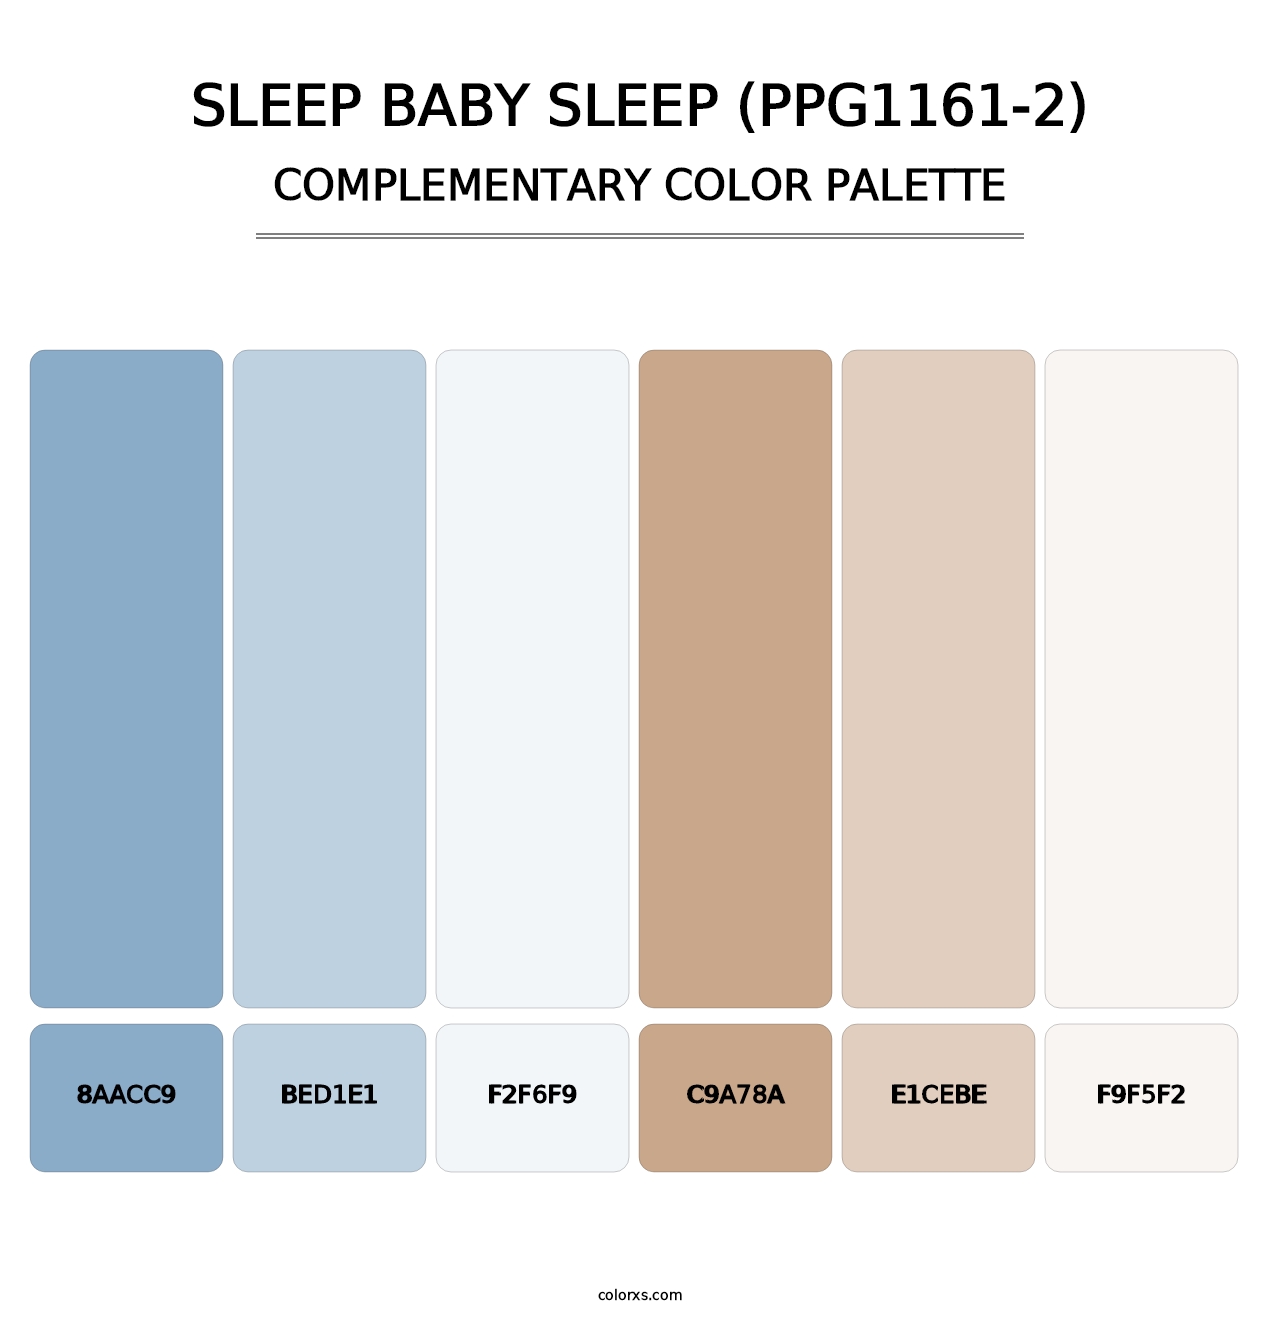 Sleep Baby Sleep (PPG1161-2) - Complementary Color Palette